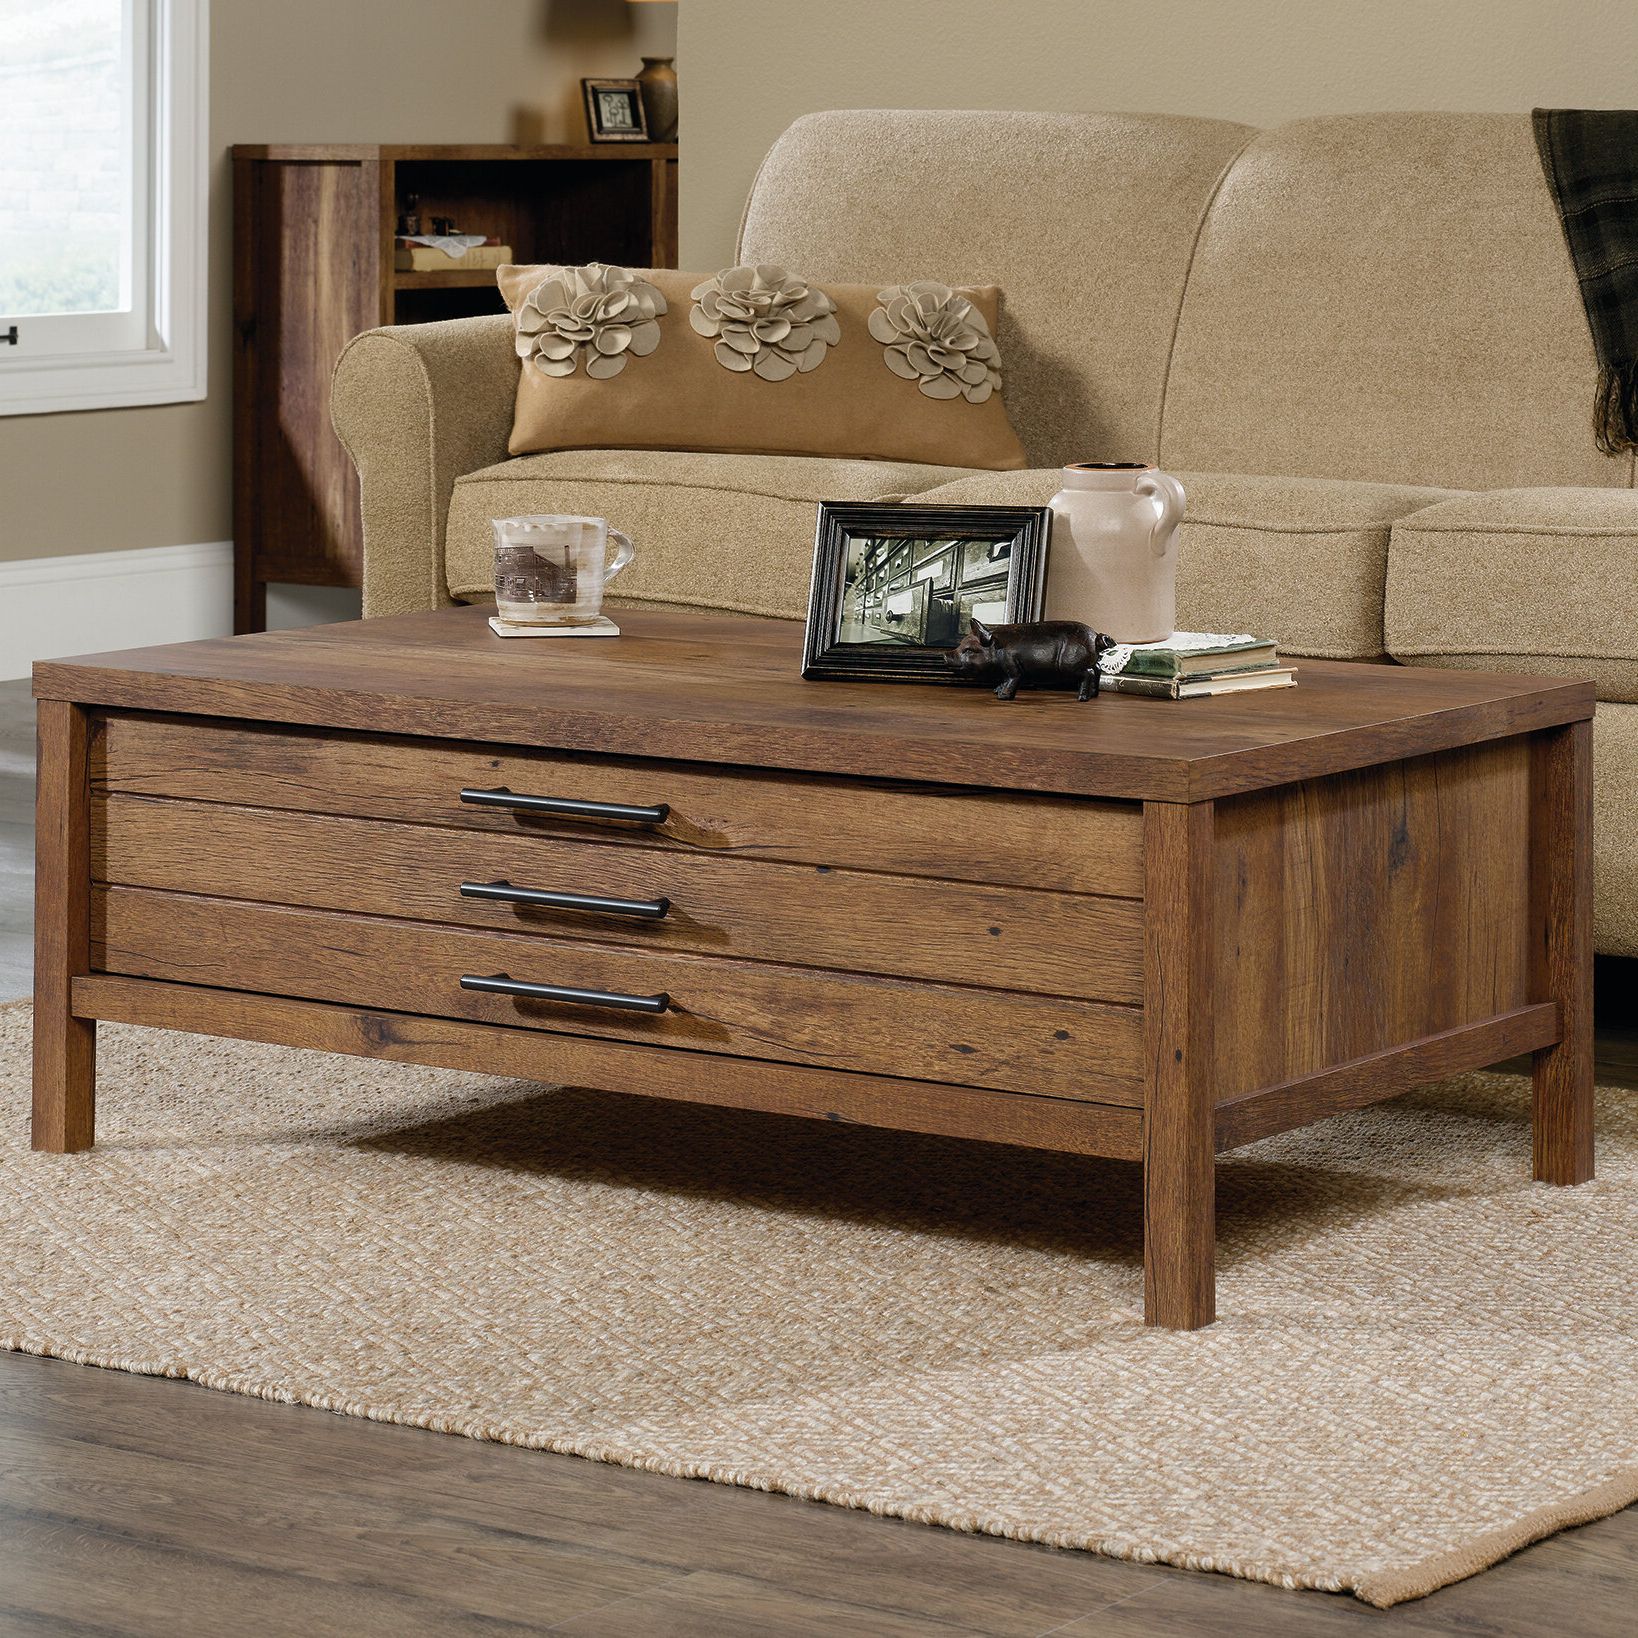 Preferred Laurel Foundry Modern Farmhouse Odile Coffee Table Intended For Modern Farmhouse Coffee Tables (View 5 of 20)